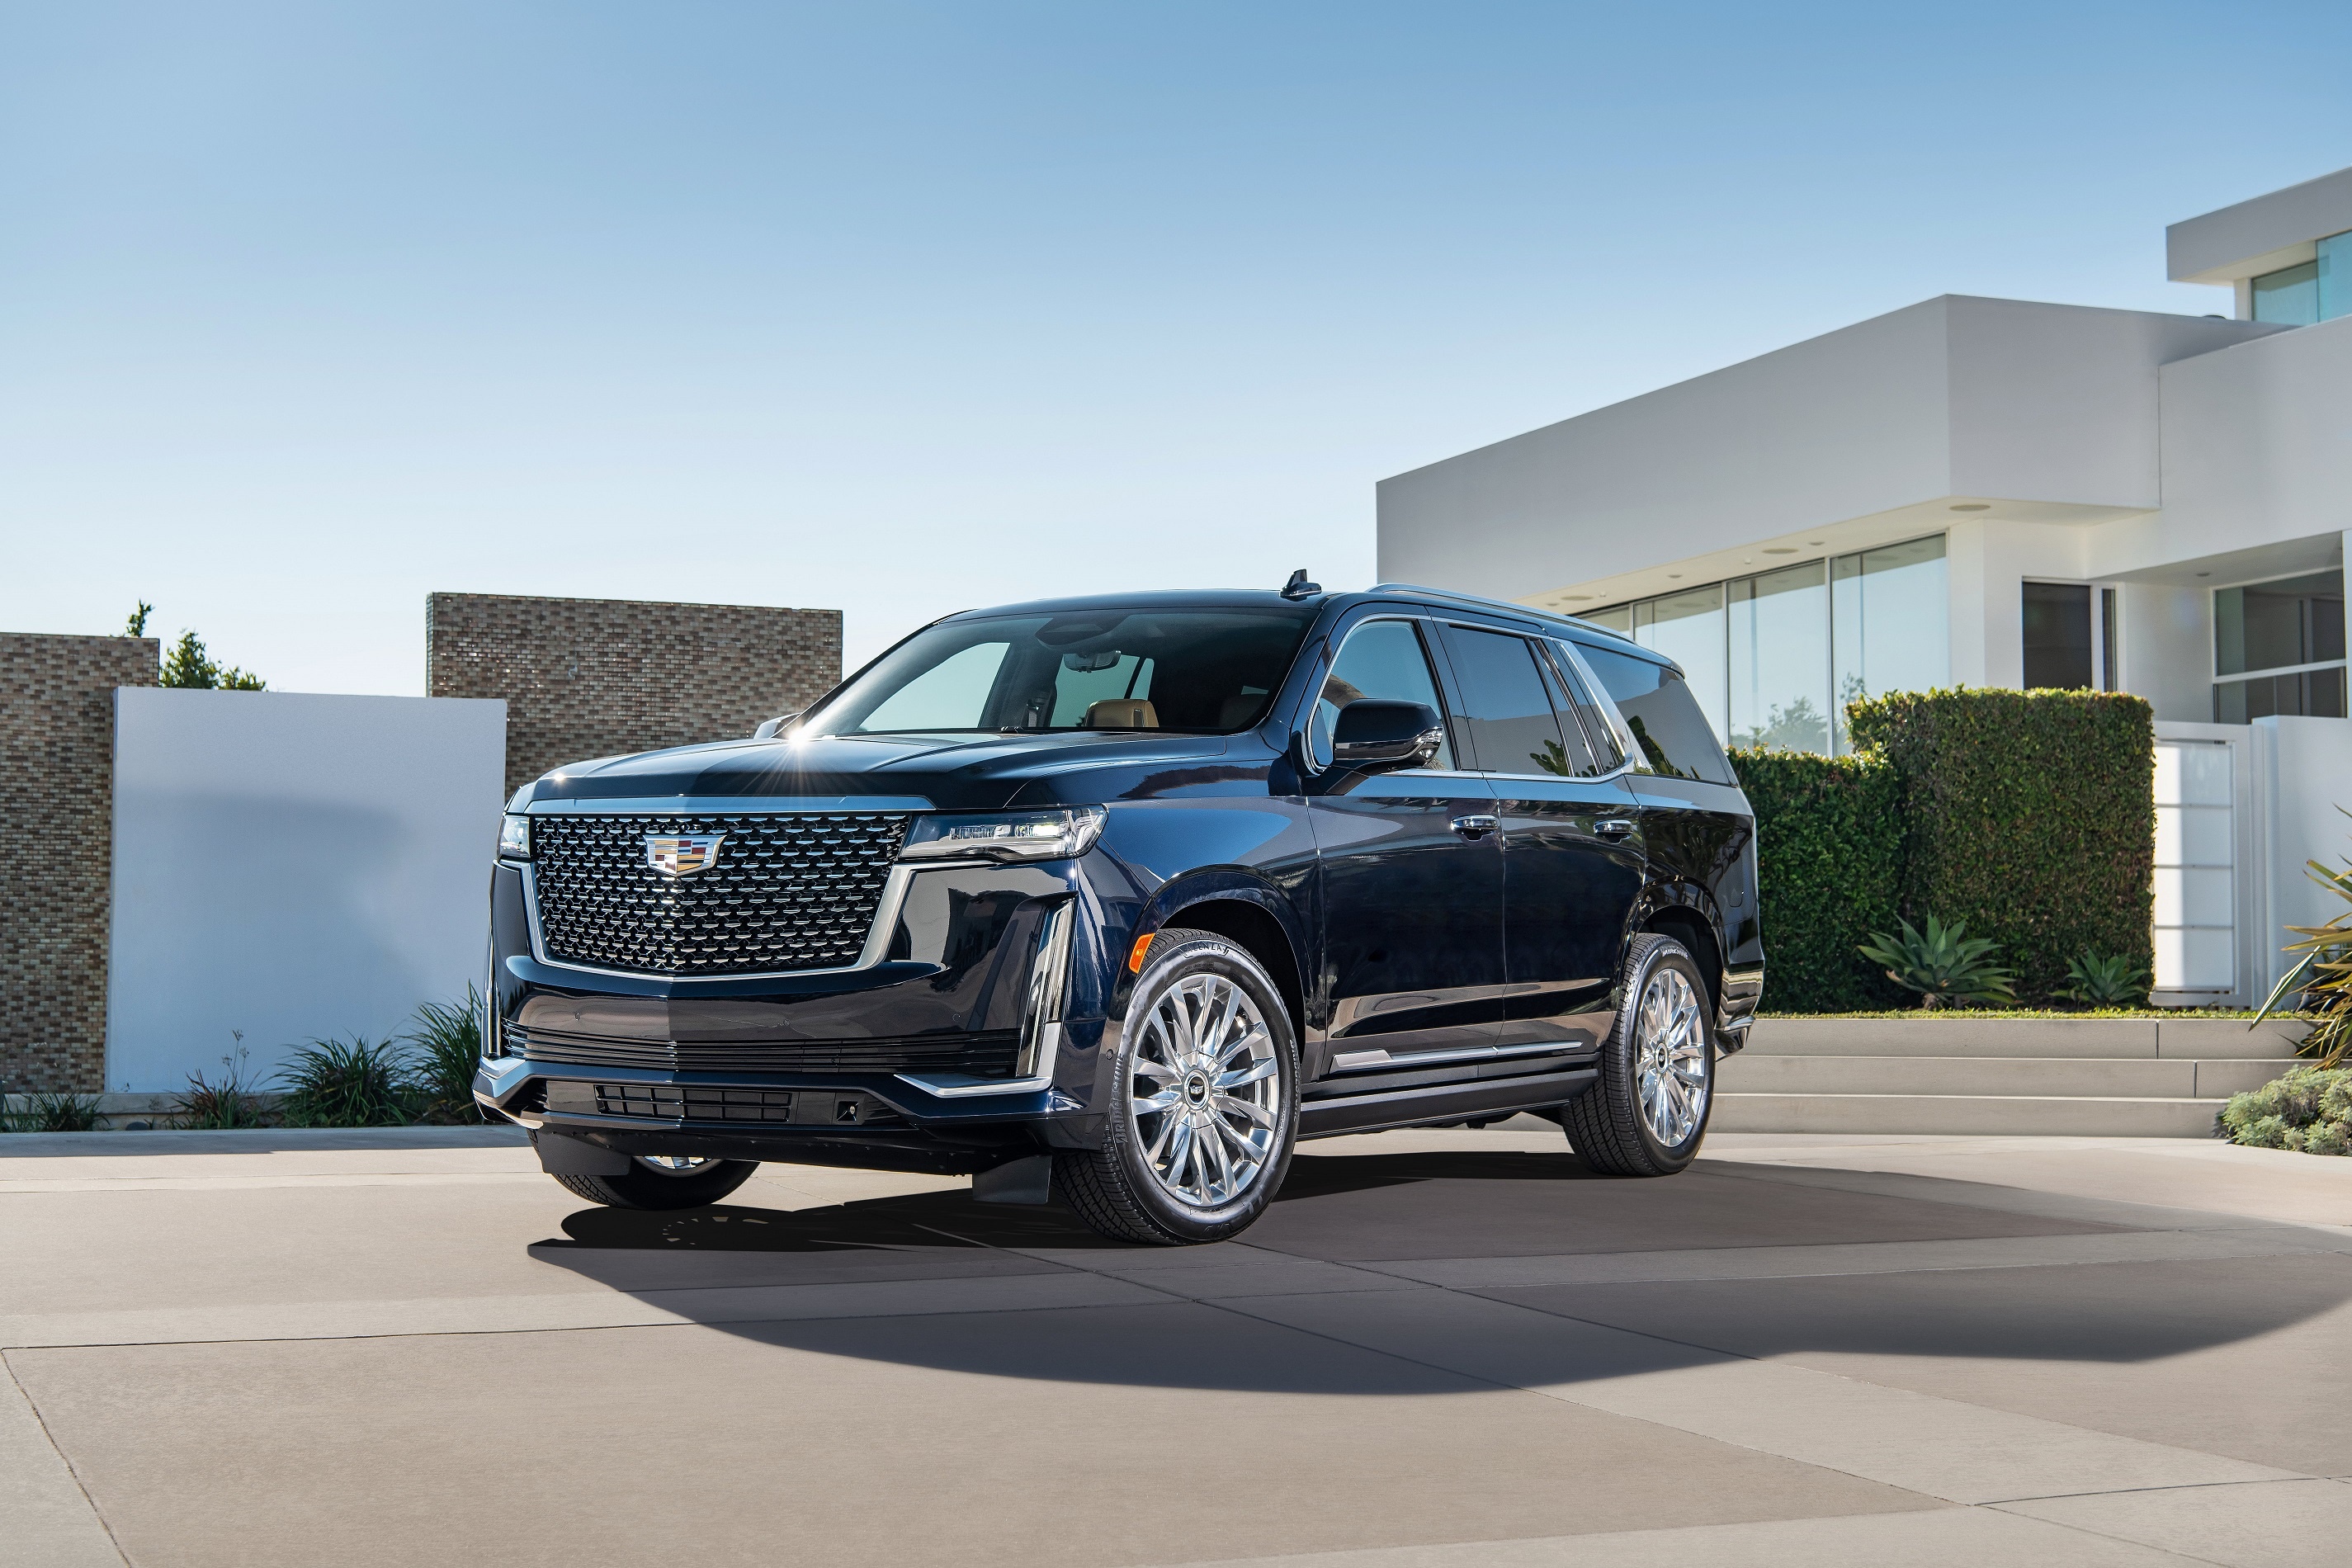 The All New 2021 Cadillac Escalade is Now on Sale in the UAE